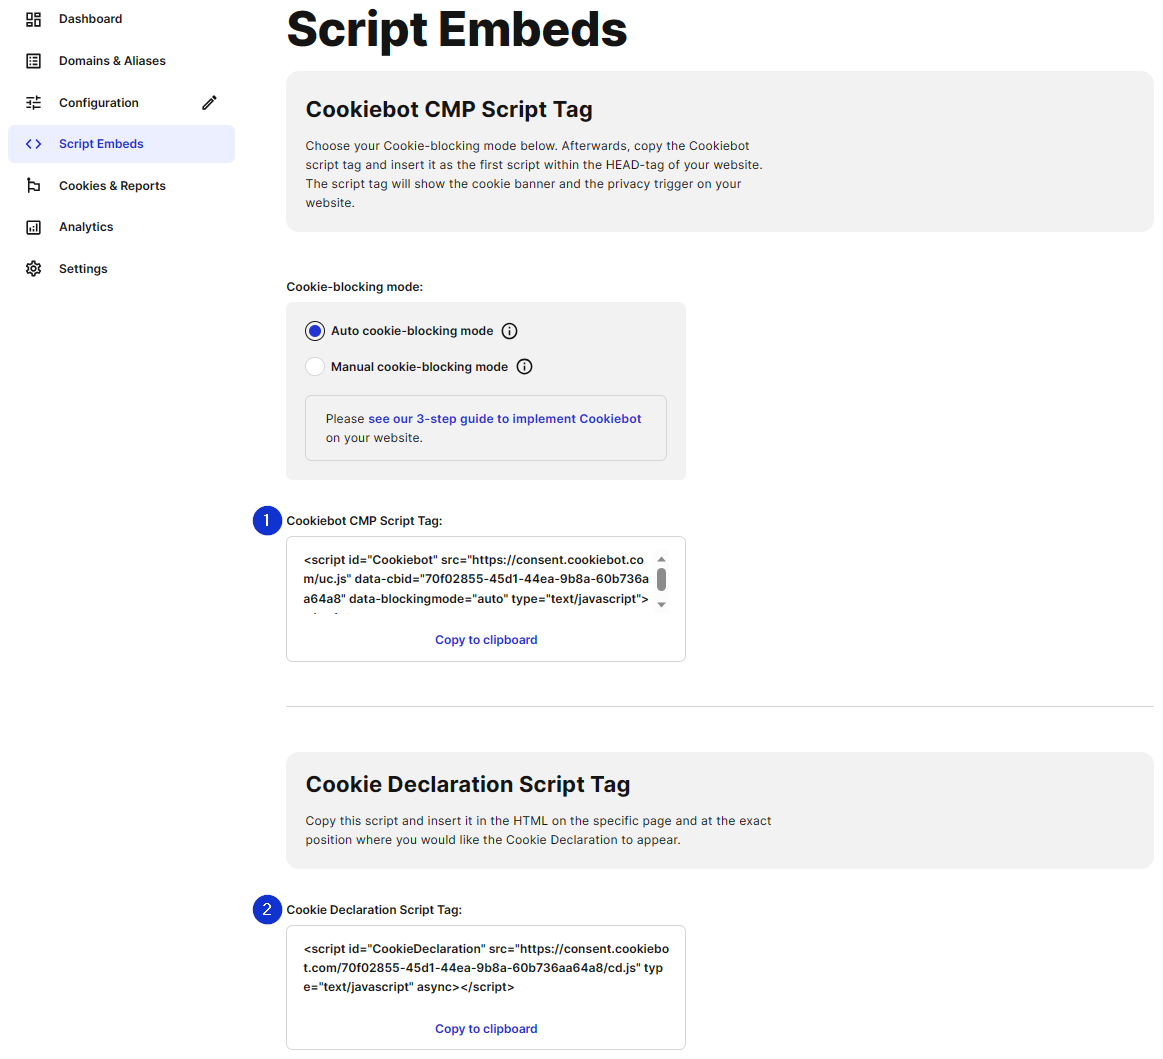 Script embeds page